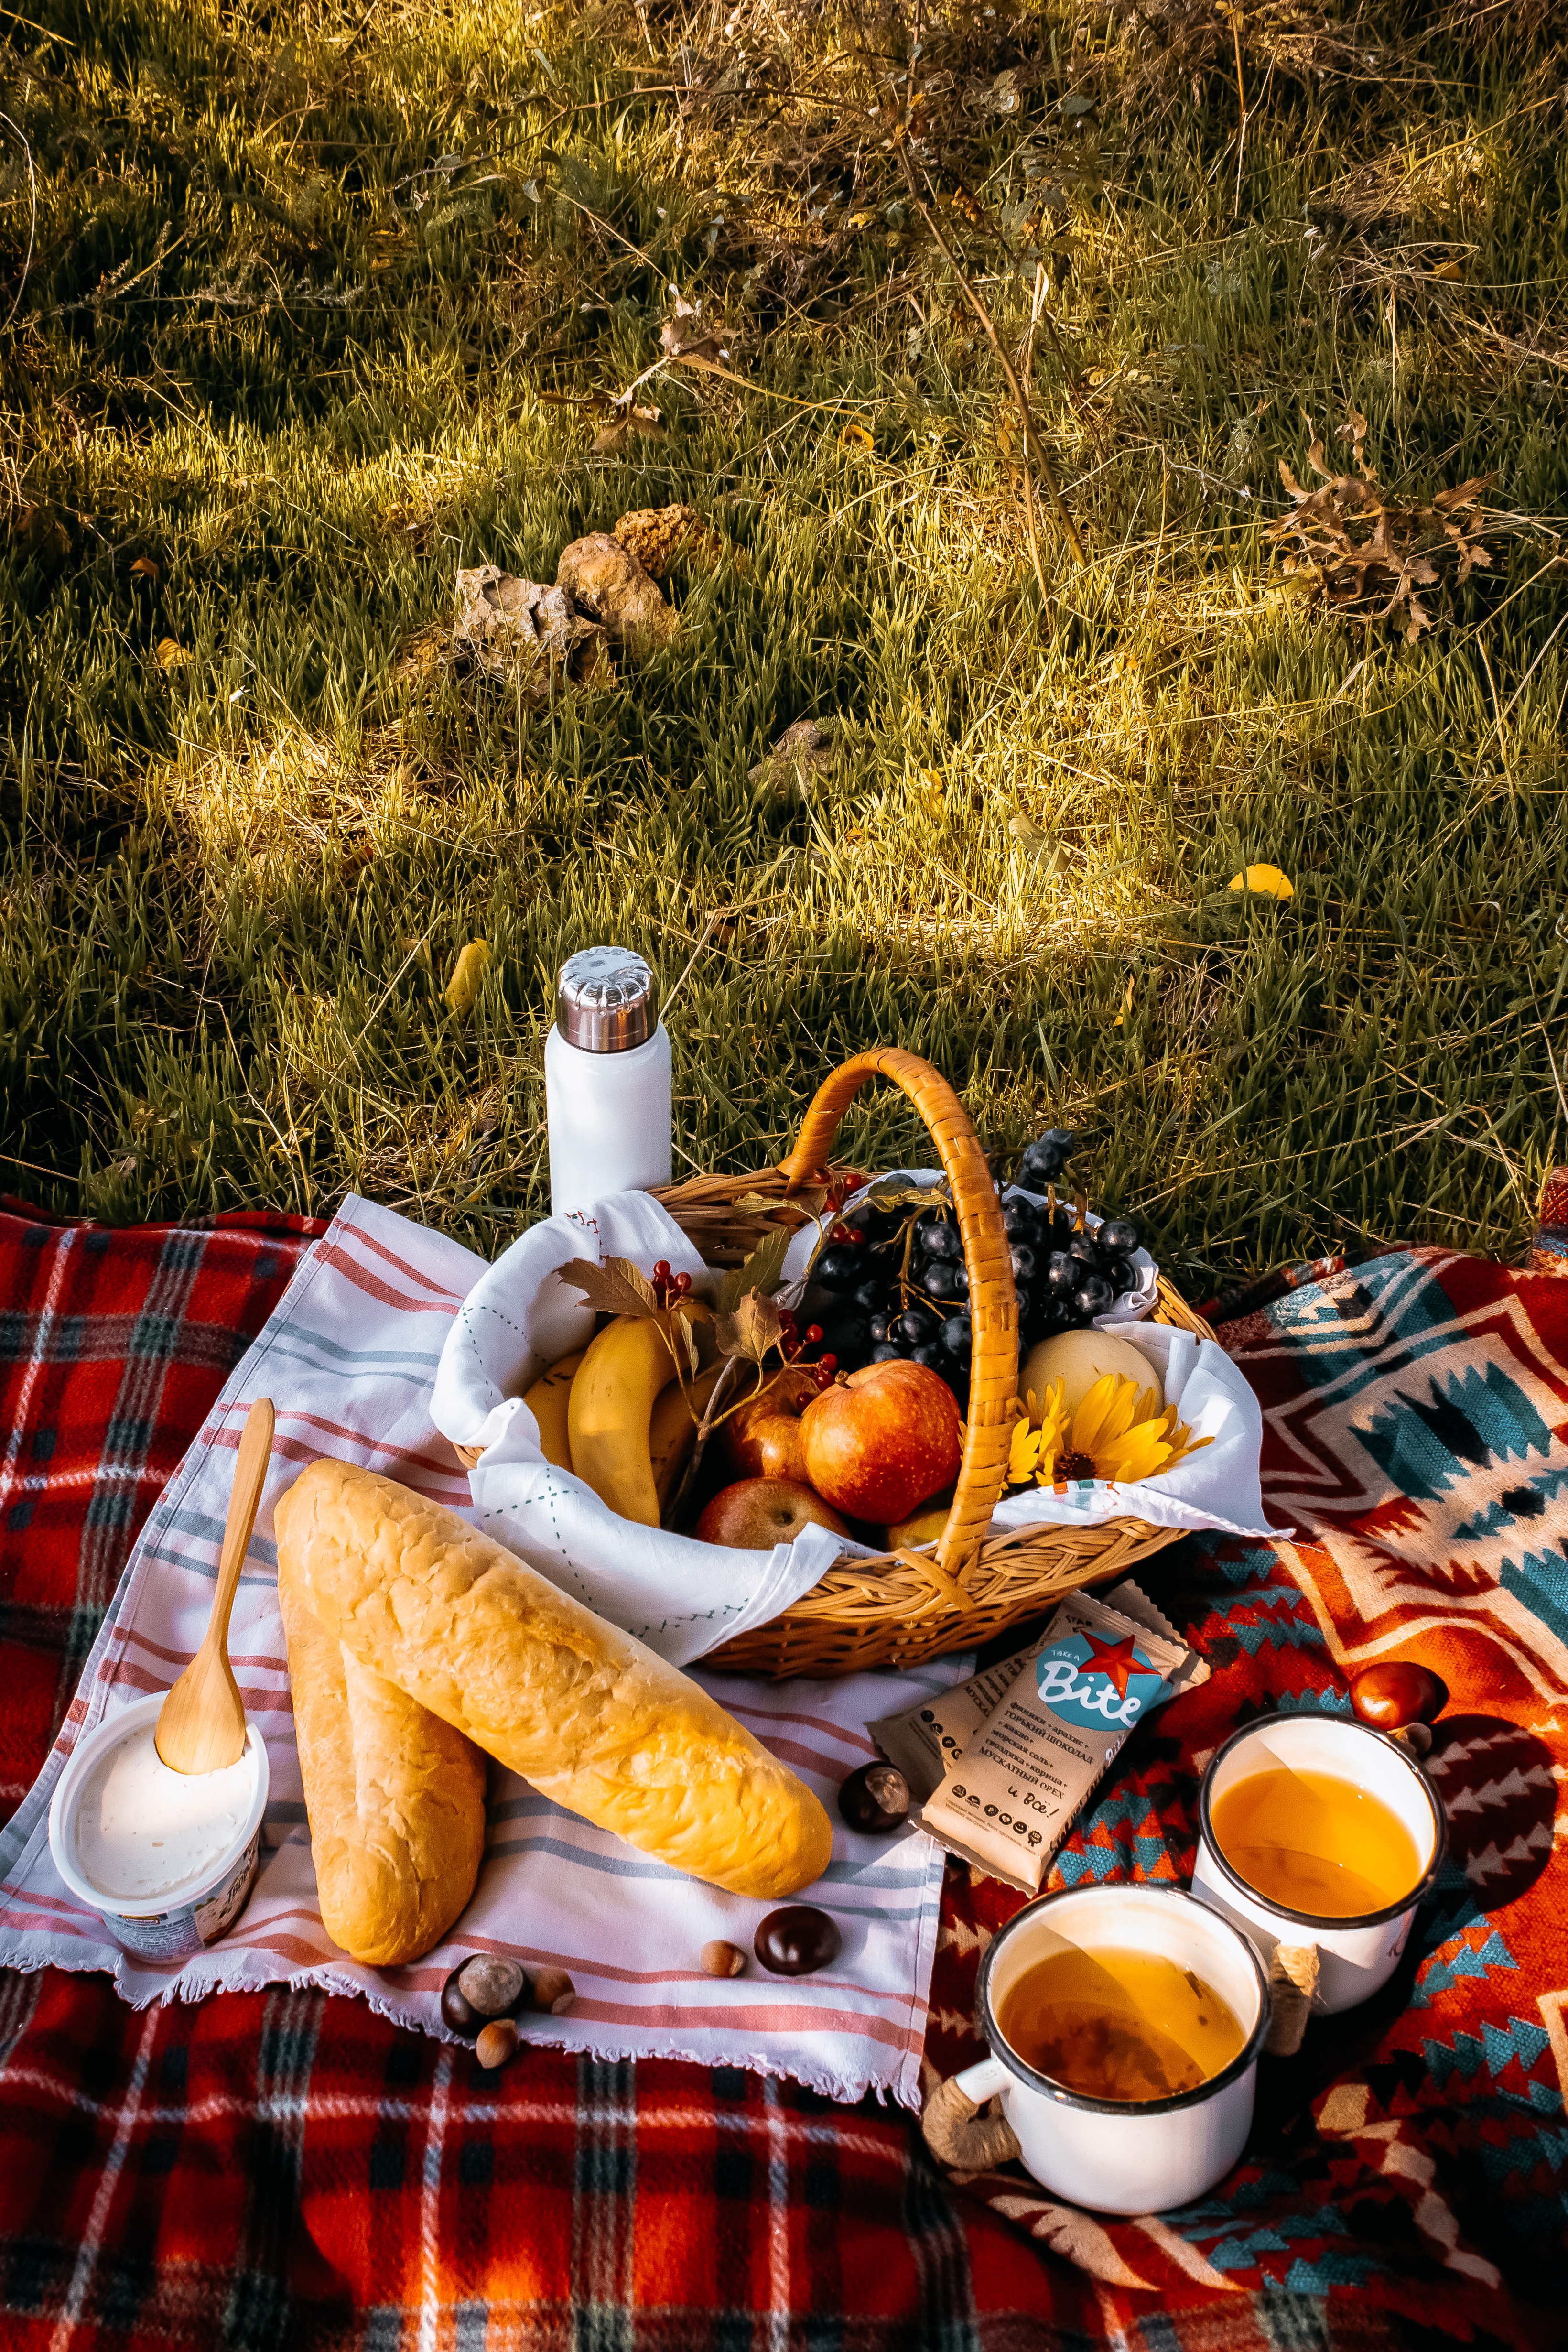 Red Gingham picnic setup with fruit basket, two Baguettes, and cider drinks